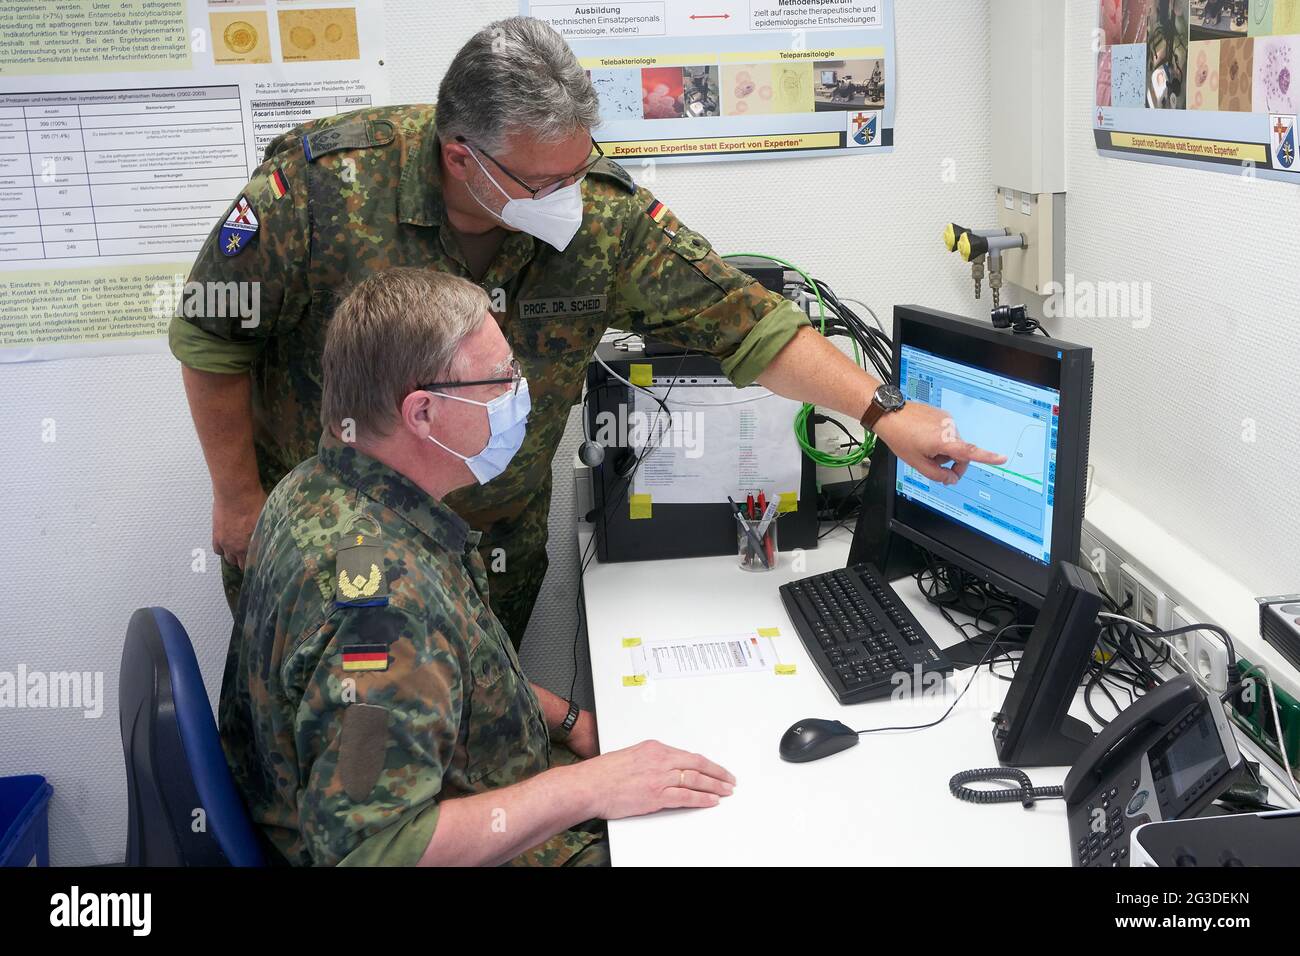 Koblenz, Germany. 09th June, 2021. Lieutenant Colonel Patrick Leander Scheid (r) and Surgeon General Dr. Stefan Kowitz conduct research at the Multinational Medical Coordination Centre/European Medical Command (MMCC/EMC) on biosensors for use in the Bundeswehr. (to dpa: 'Bundeswehr relies on biosensors - more health data and performance') Credit: Thomas Frey/Thomas Frey/dpa/Alamy Live News Stock Photo